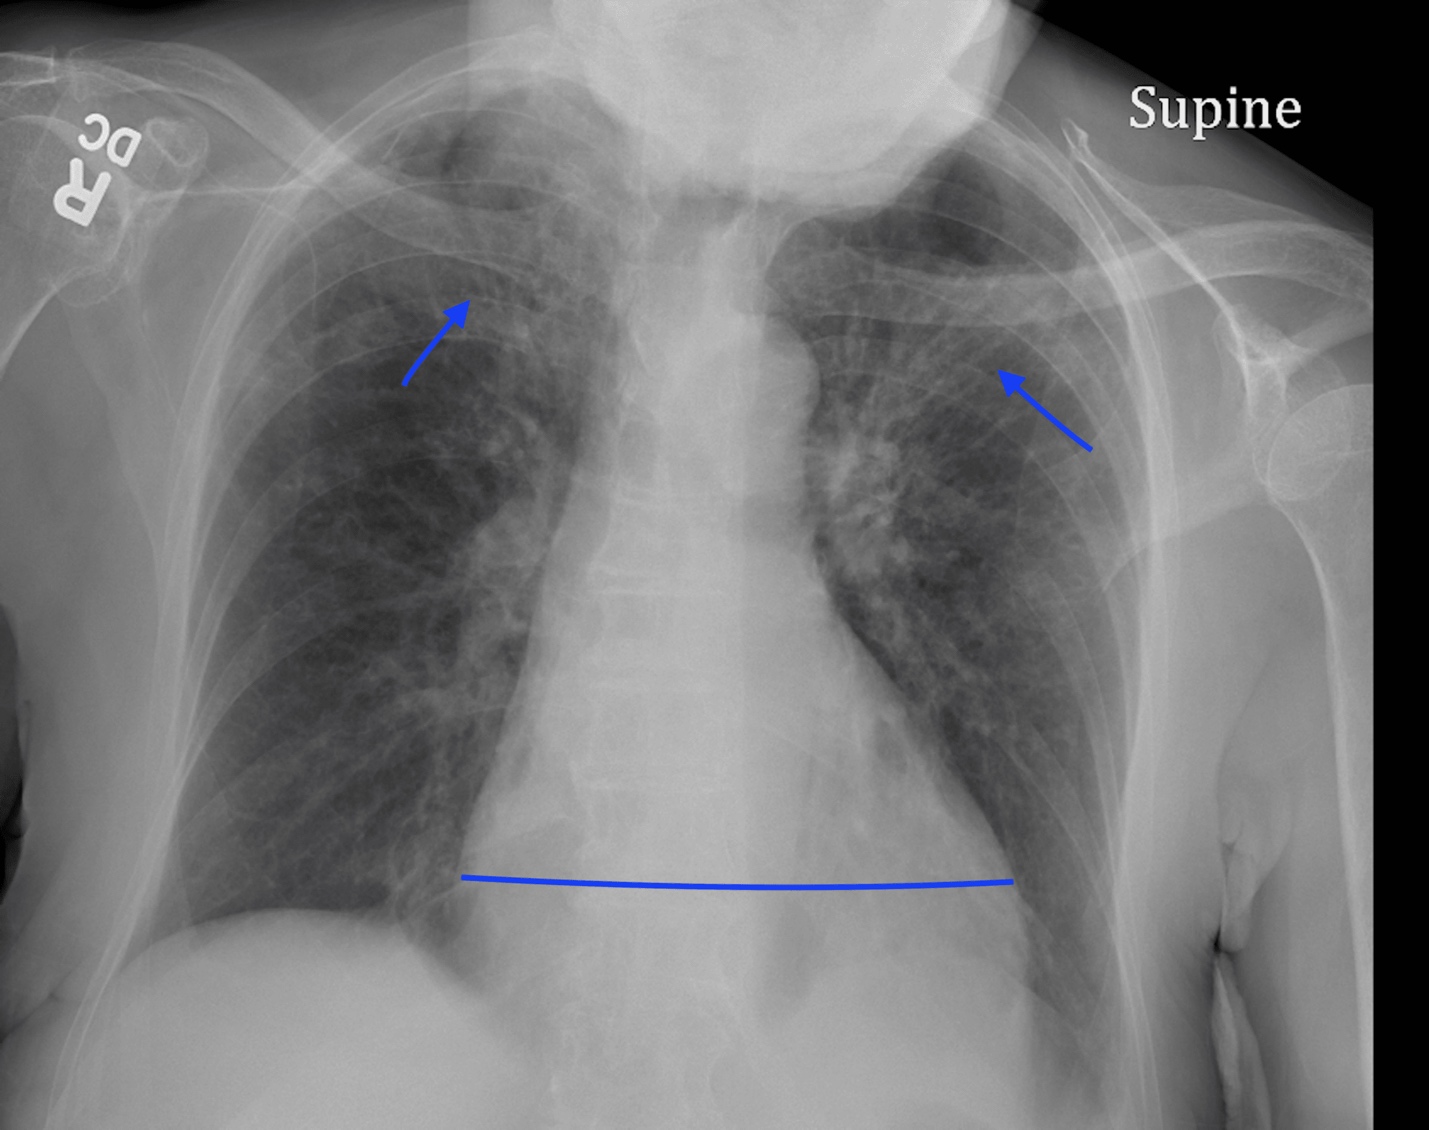 X-ray of a person's chest

Description automatically generated with low confidence